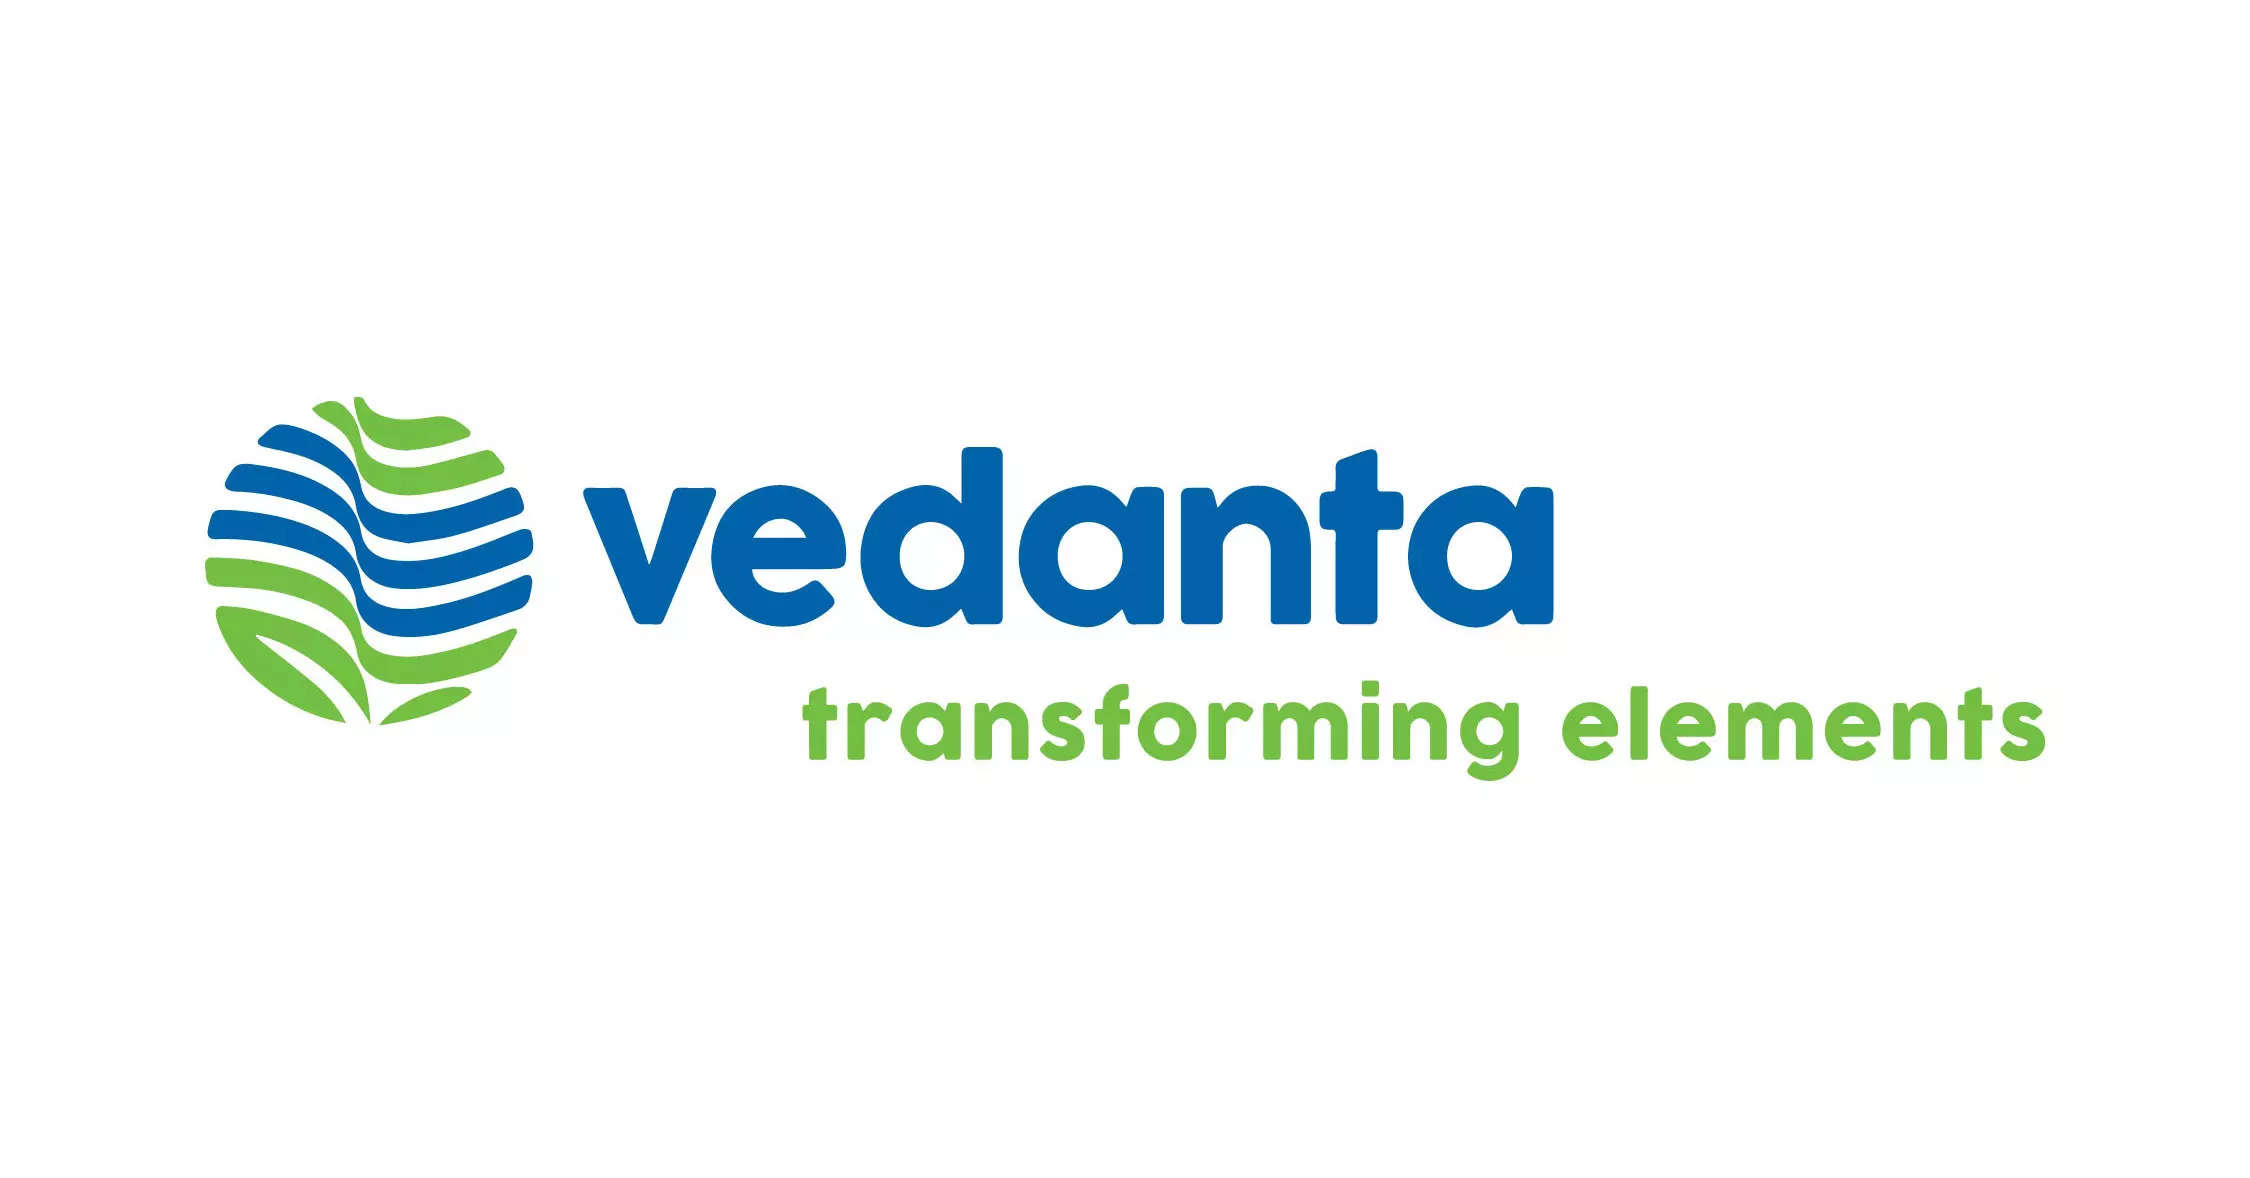 Vedanta fell 9% after it clarified a semiconductor business owned by Volcan Investments